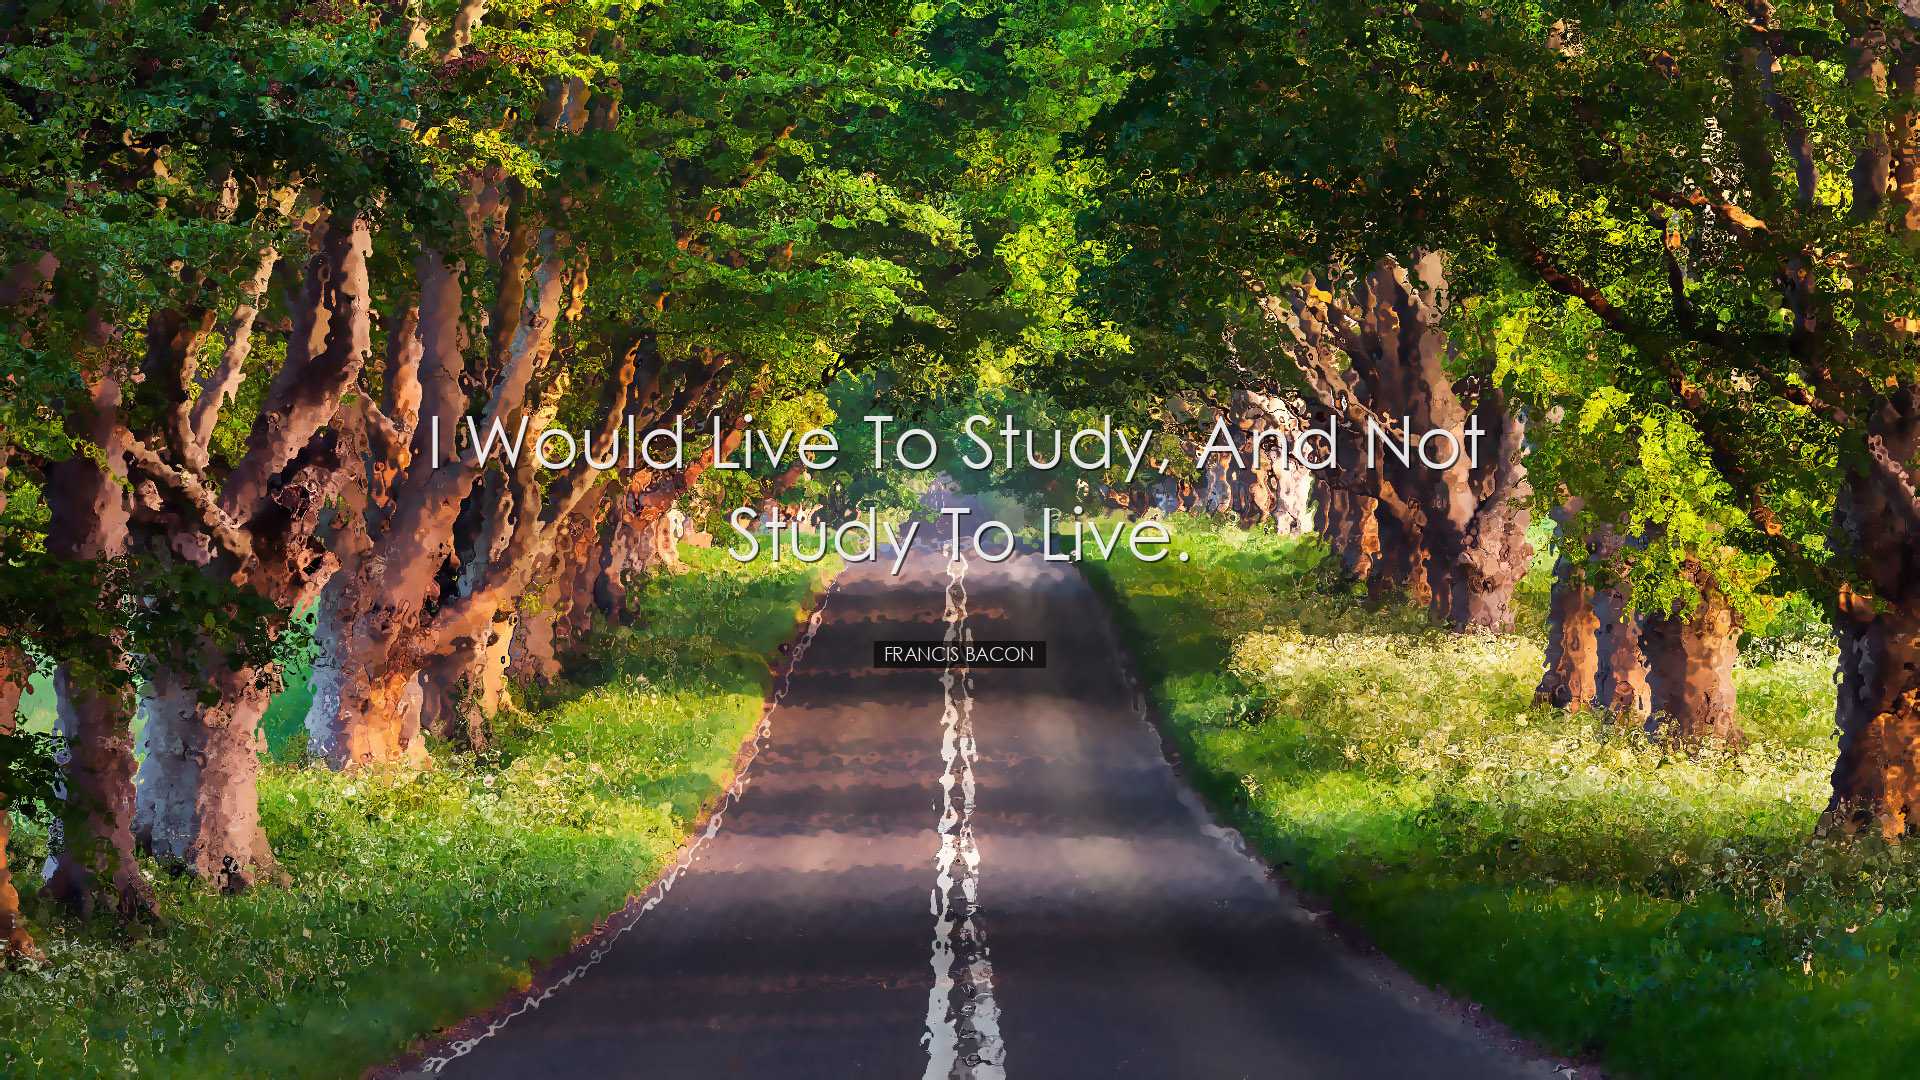 I would live to study, and not study to live. - Francis Bacon